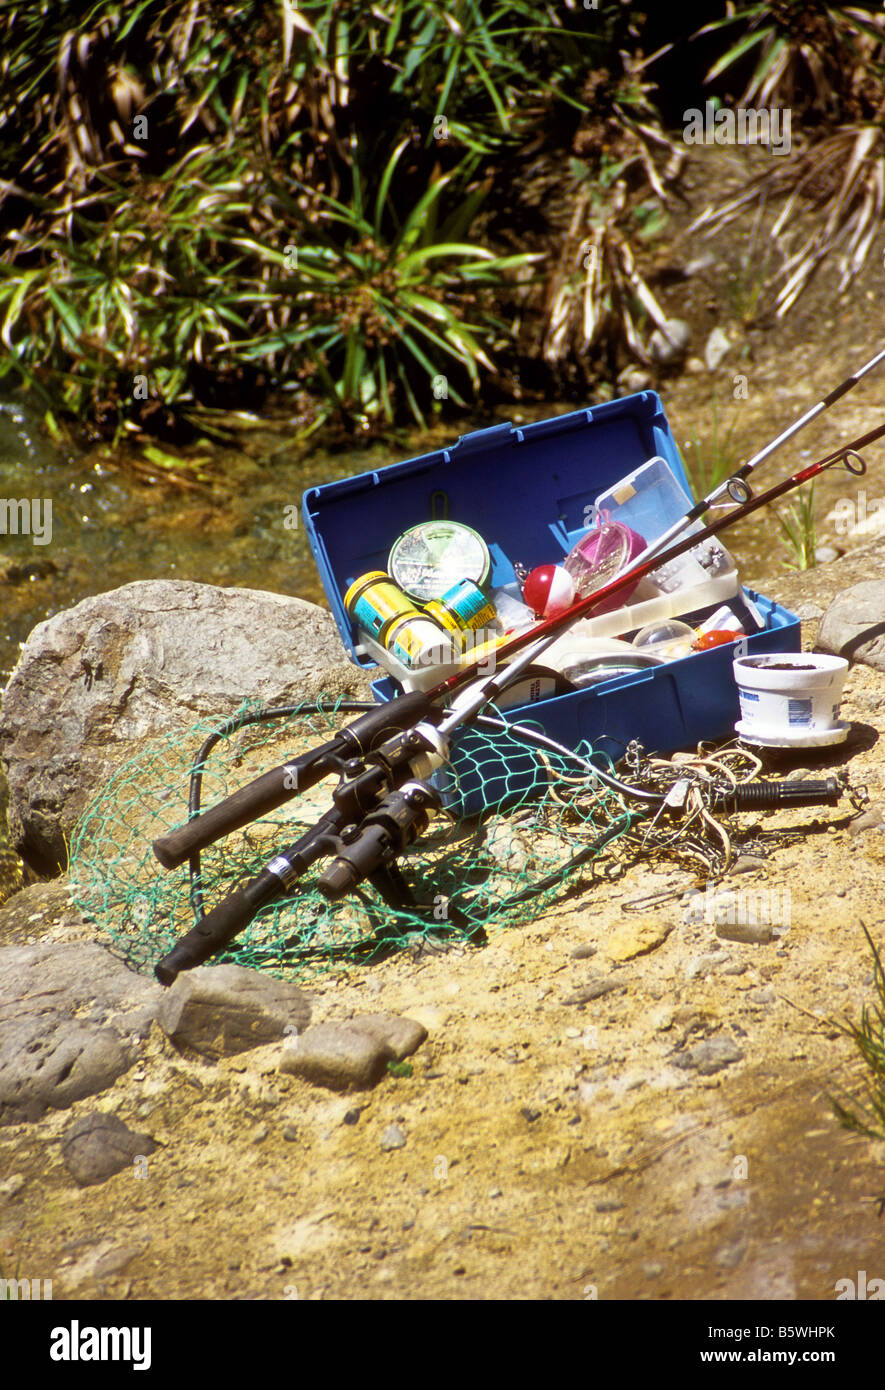 https://c8.alamy.com/comp/B5WHPK/fishing-tackle-and-poles-rest-next-to-stream-B5WHPK.jpg